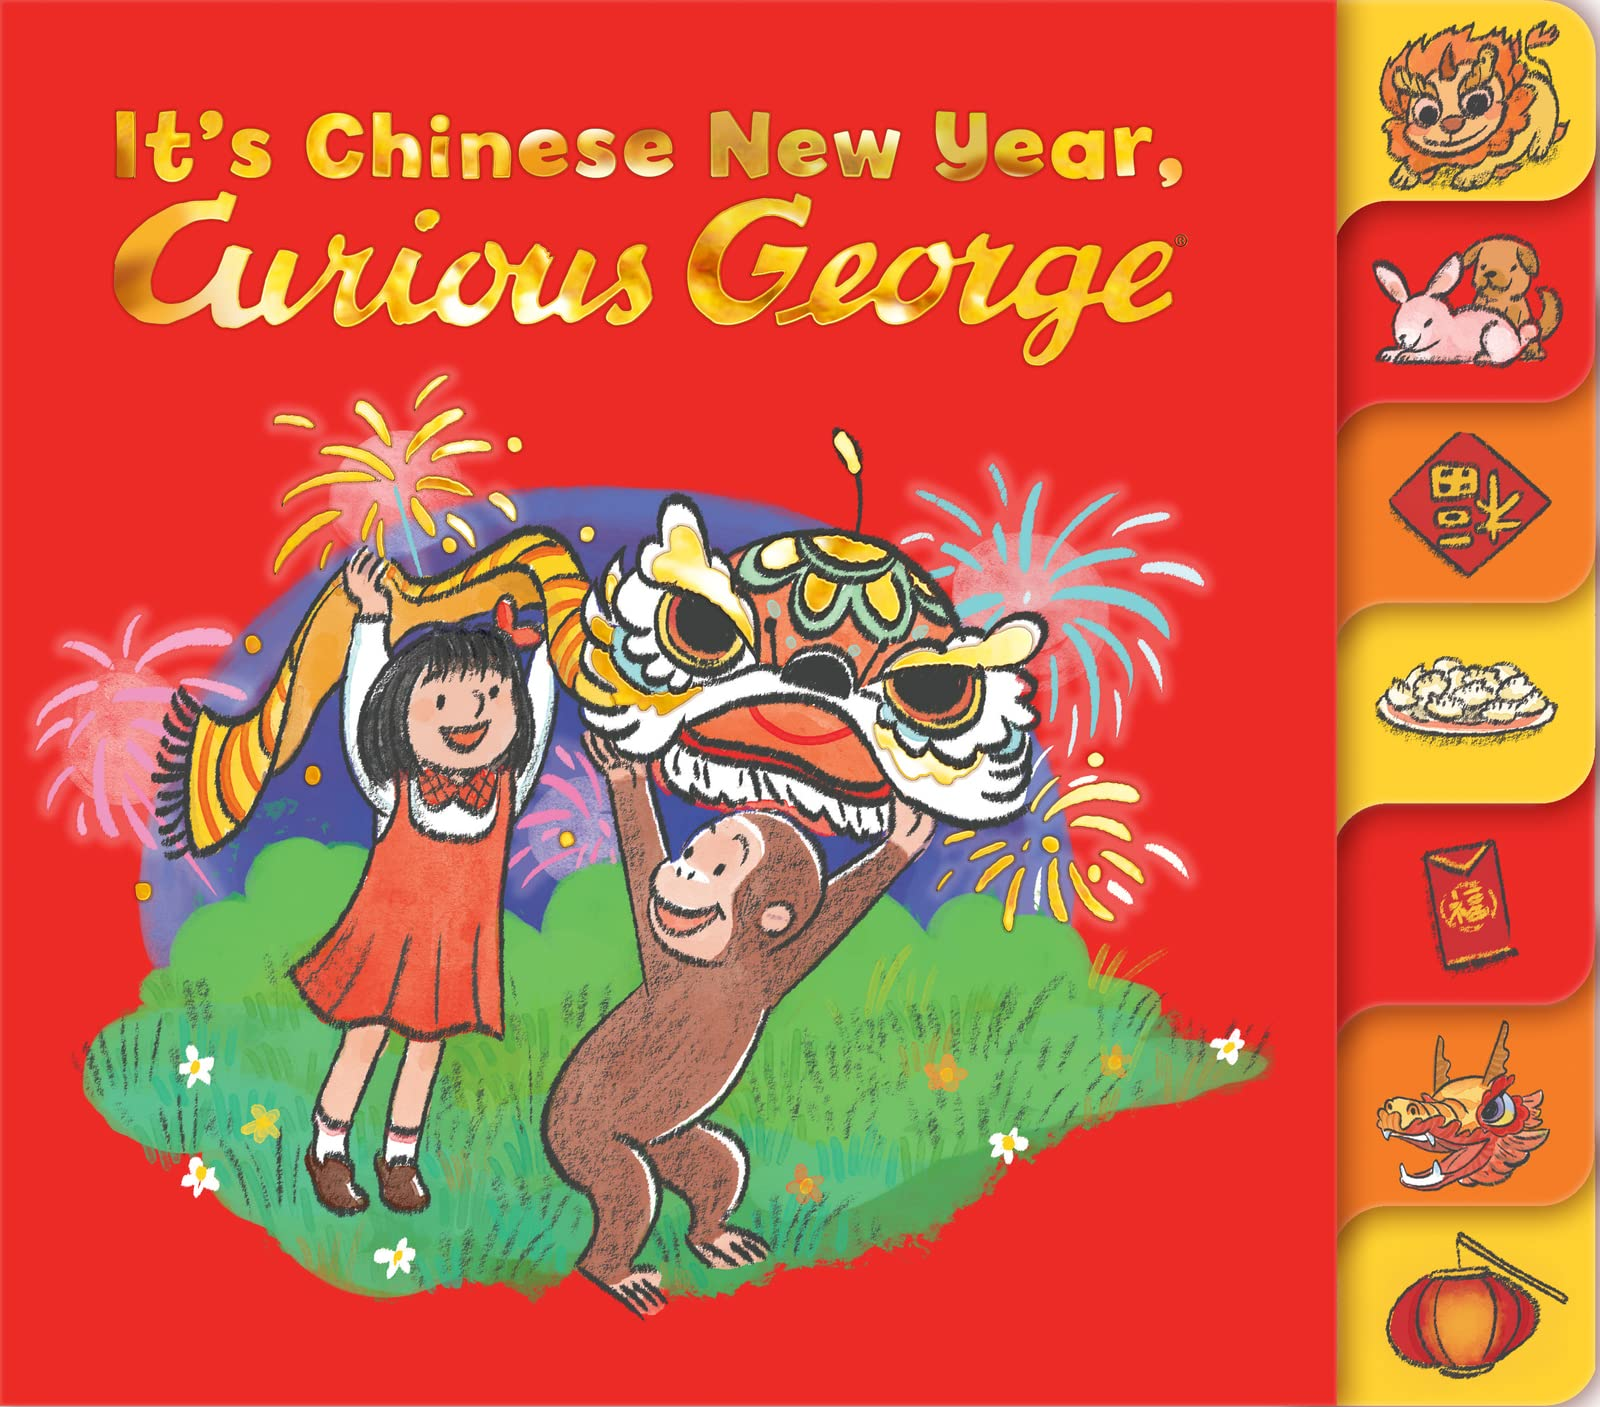 It's Chinese New Year Curious George Book Reivew | MissPandaChinese.com